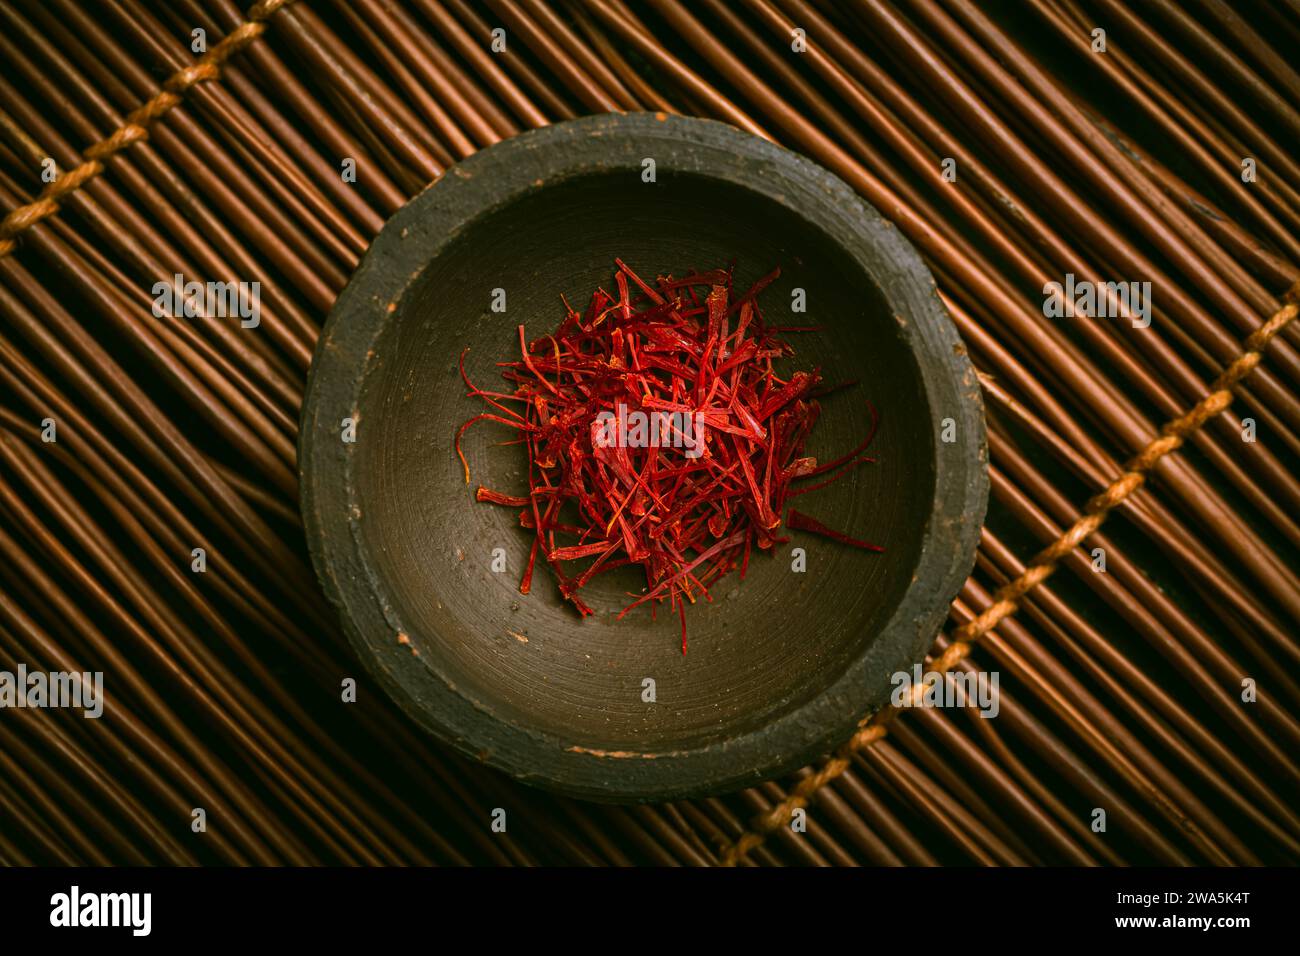 Saffron threads in a small bowl. Spices, cooking ingredients, flavor. Stock Photo